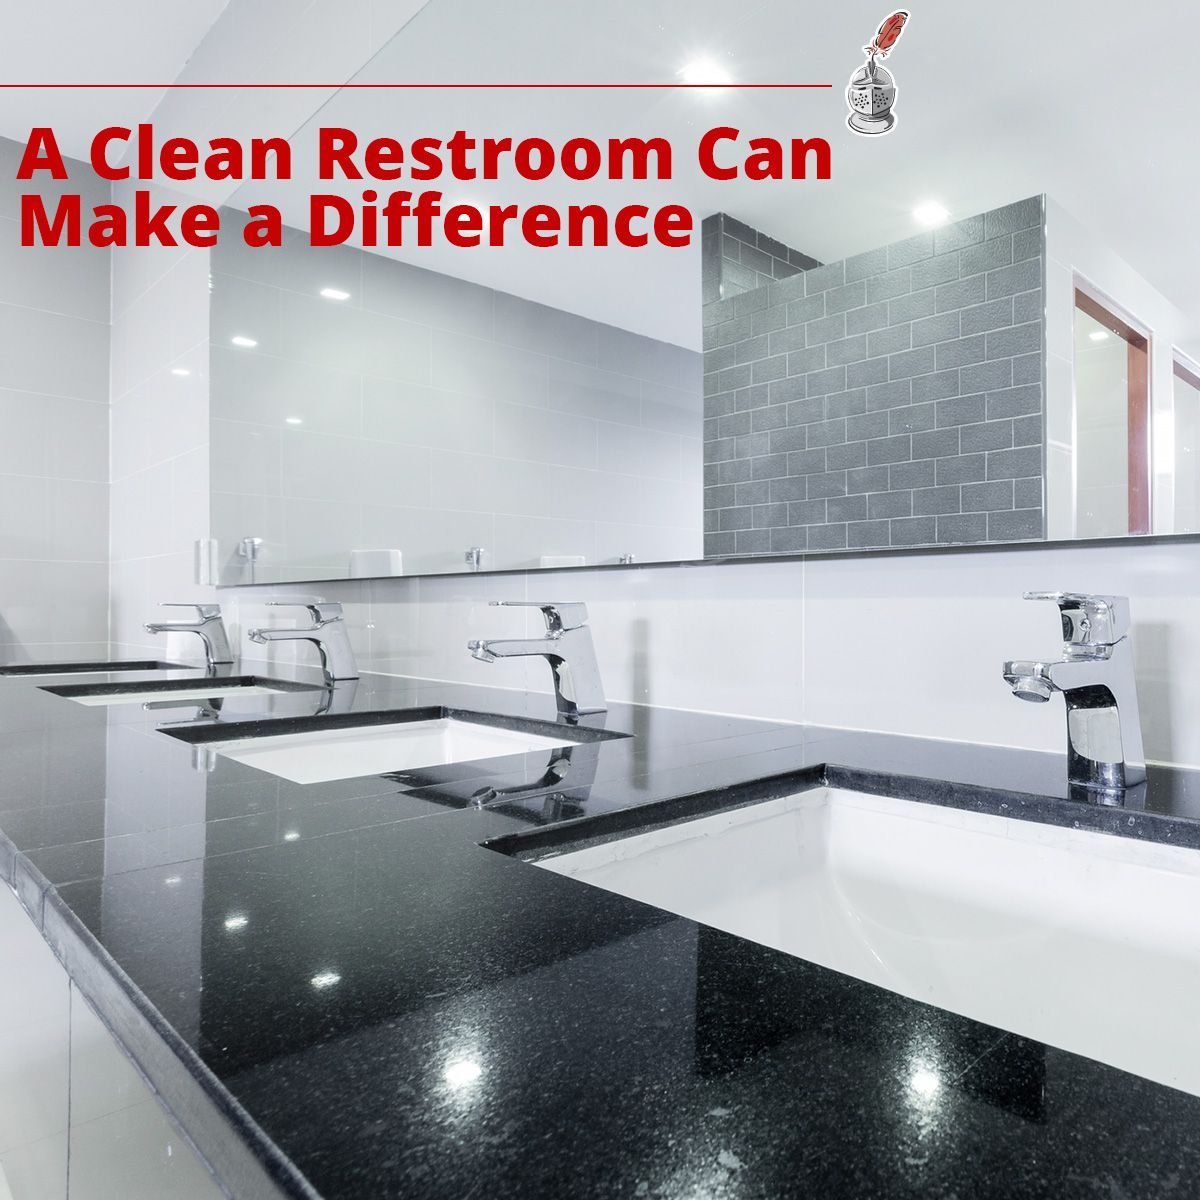 A Clean Restroom Can Make a Difference